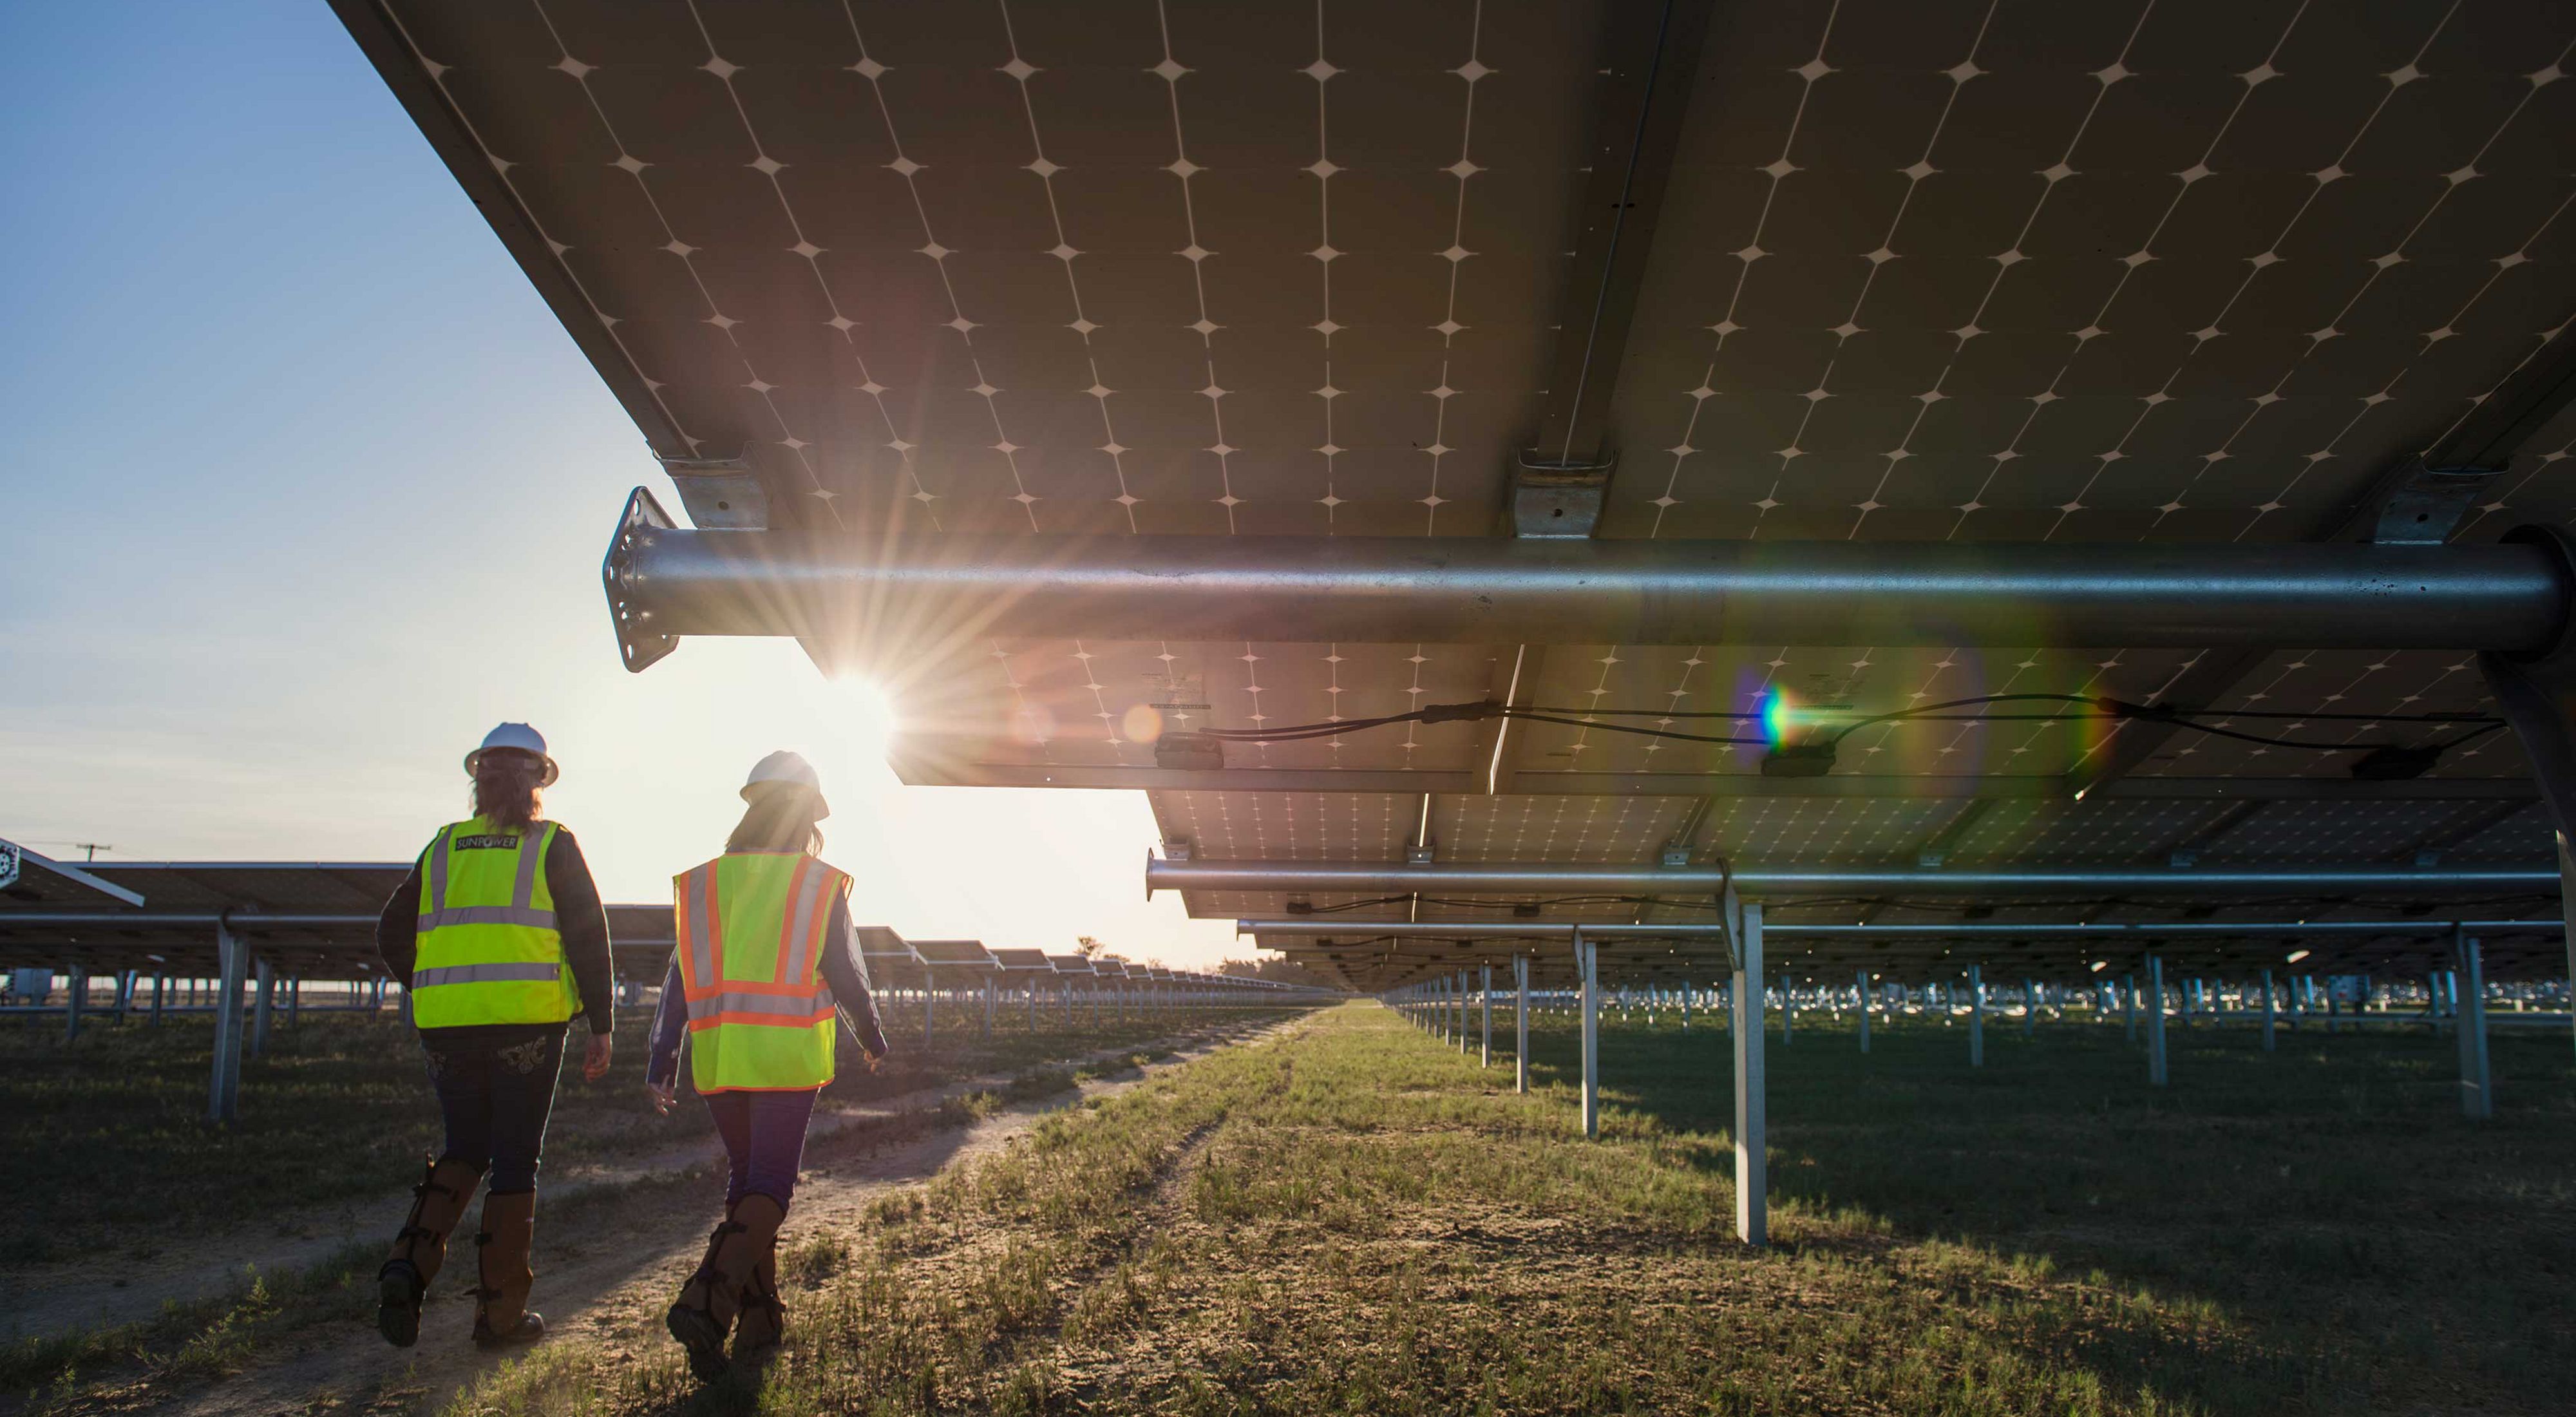 Laura Crane and a Fuller Star employee walking through the array of solar panels at the Fuller Star plant in Lancaster, California.